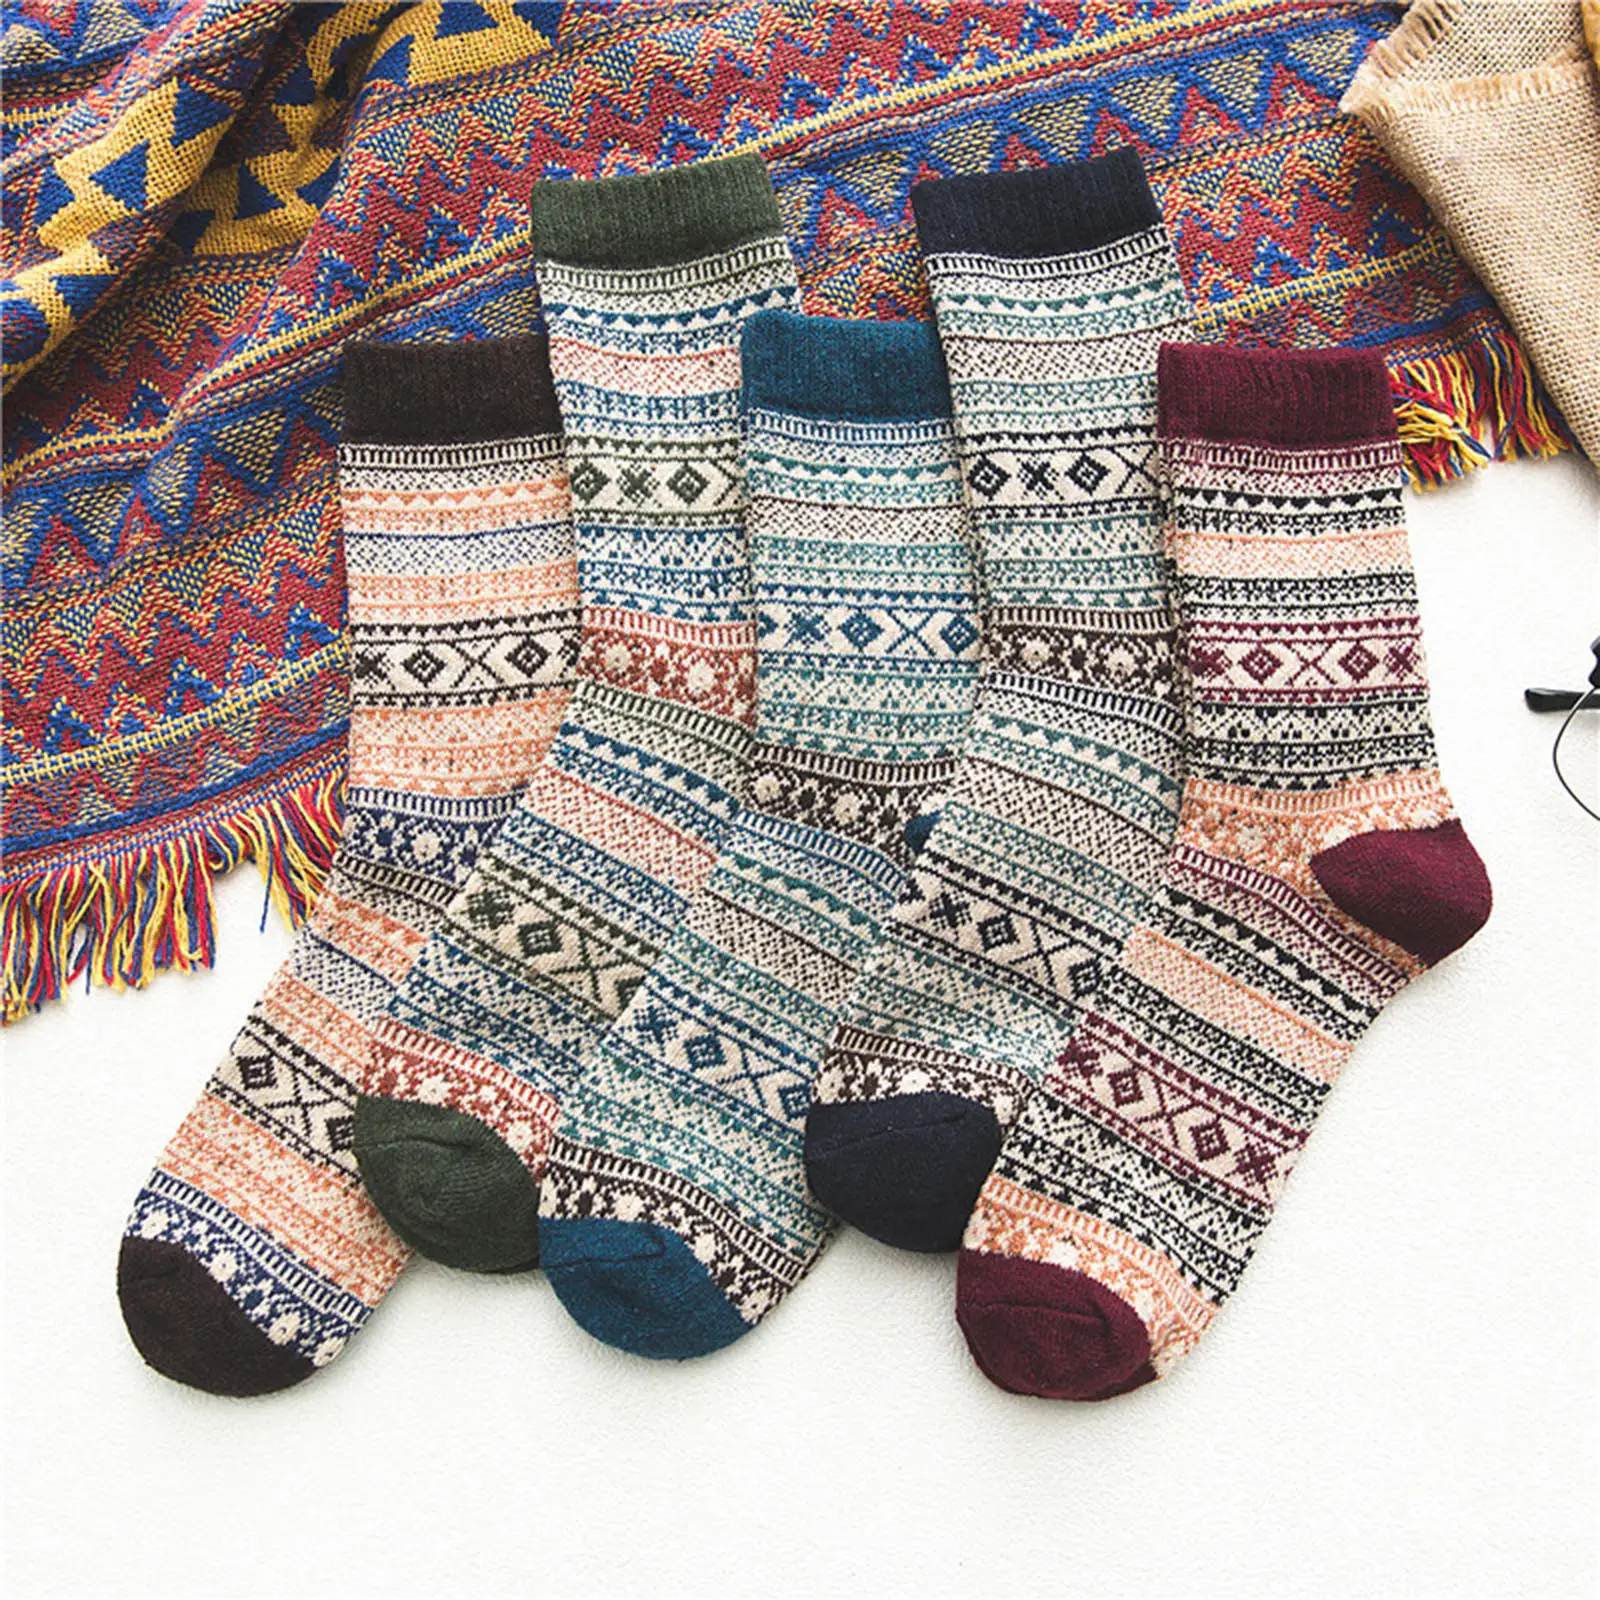 5 Pairs Vintage Style Mens Socks Thick Winter Warm Wool Comfy One Size for Men Camping